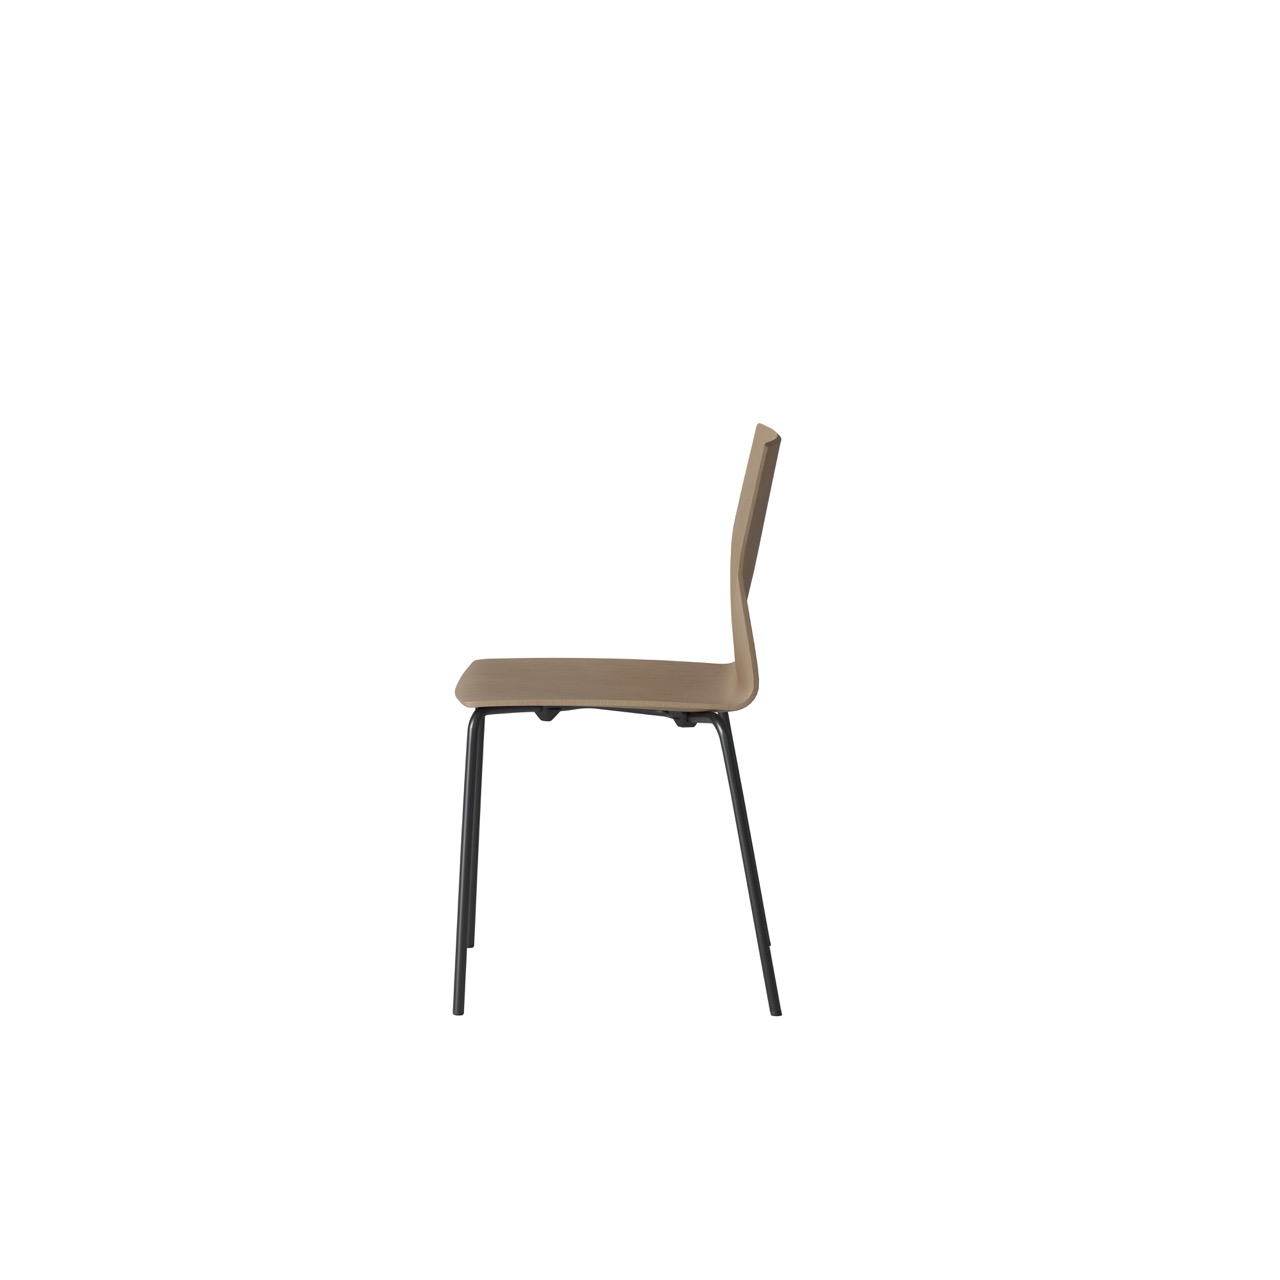 OCEE&FOUR – Chairs – FourCast 2 Four – Veneer shell - Packshot Image 2 Large